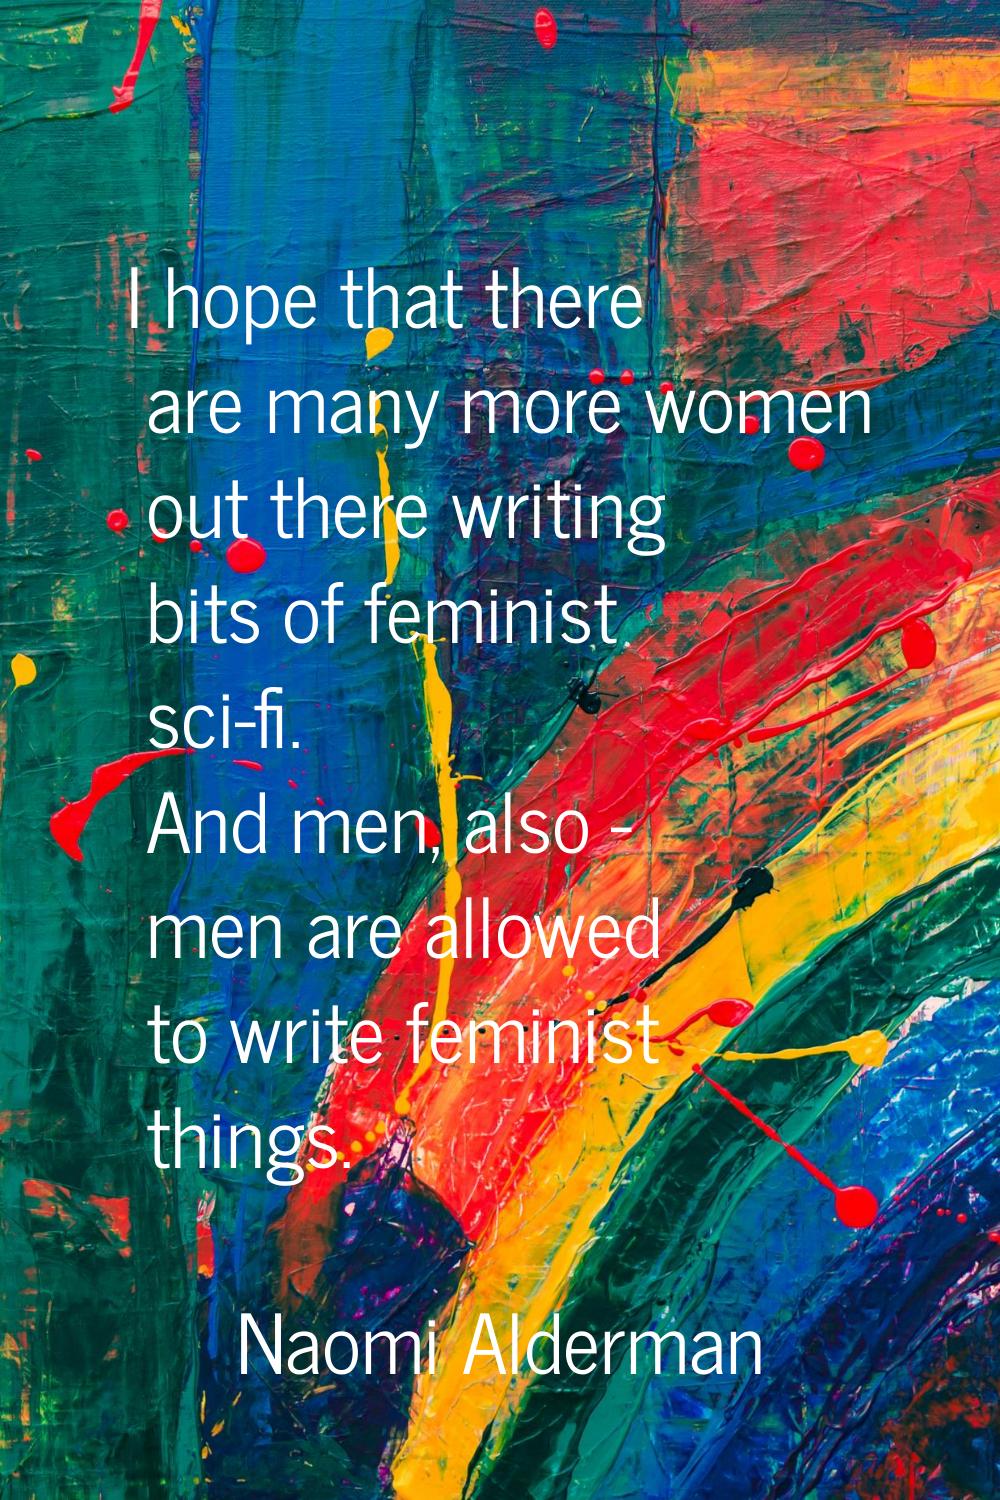 I hope that there are many more women out there writing bits of feminist sci-fi. And men, also - me